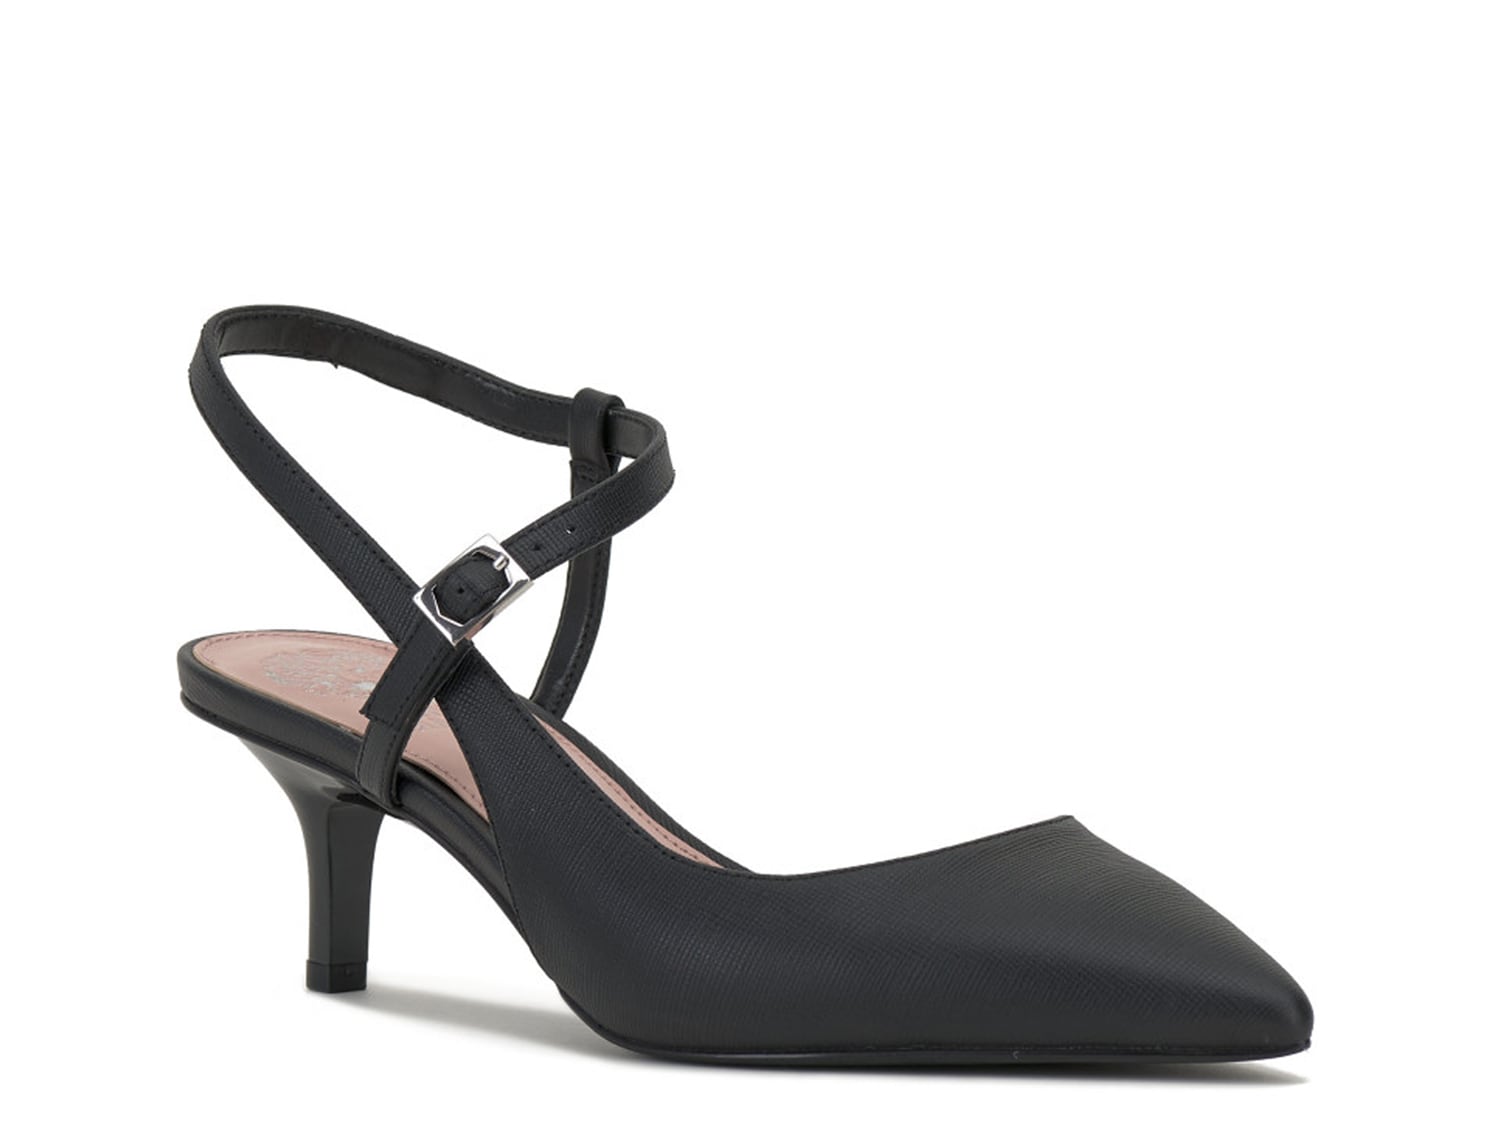 Vince Camuto Riccou Pump - Free Shipping | DSW